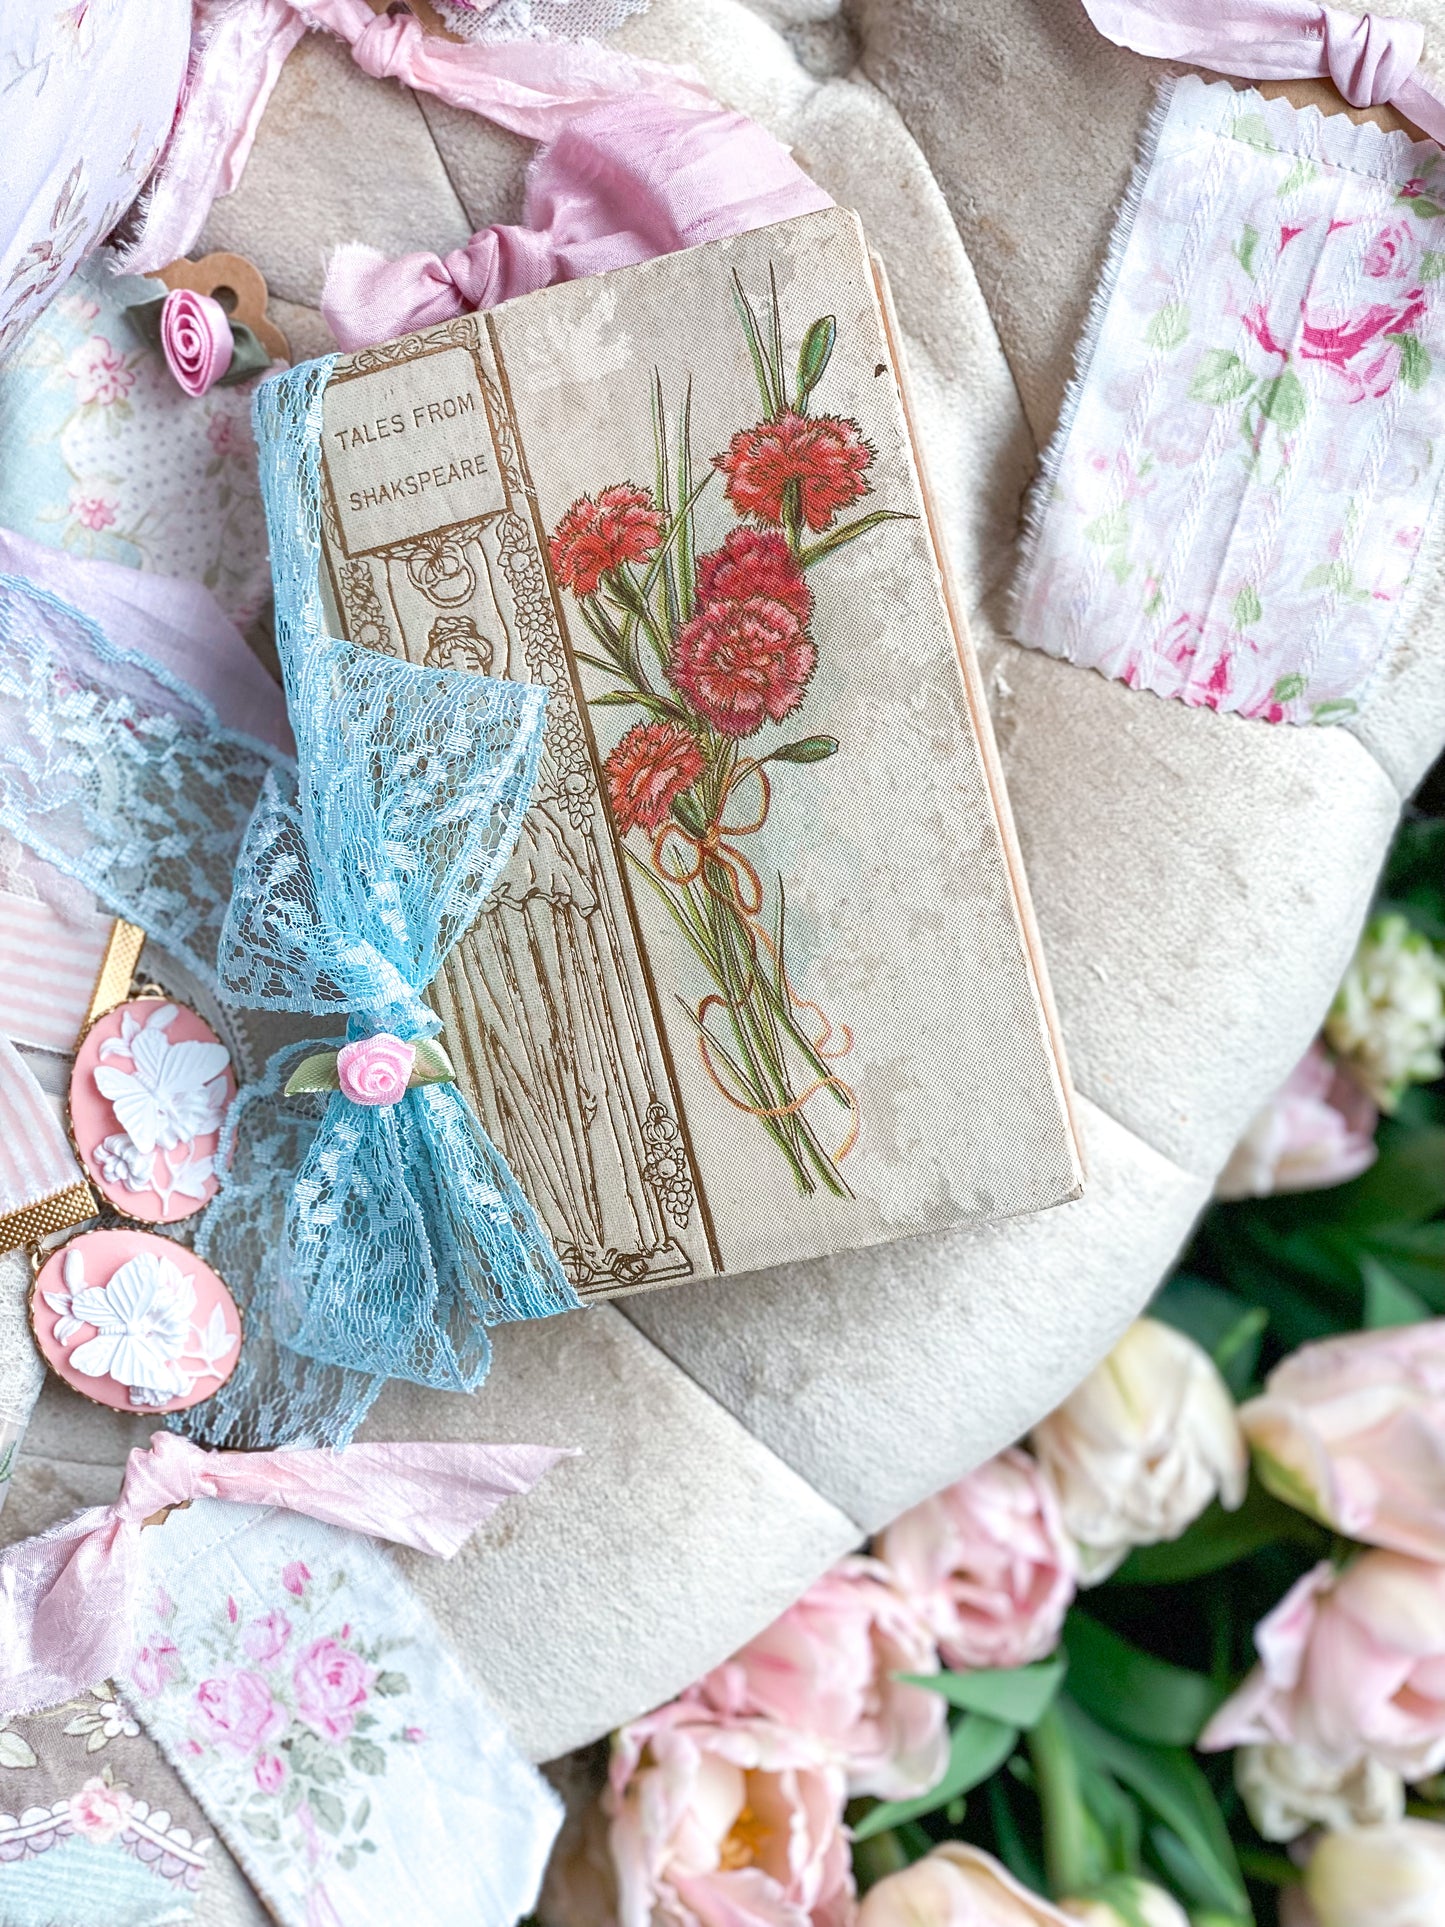 Tales From Shakespeare by Lamb with Pink Floral Cover